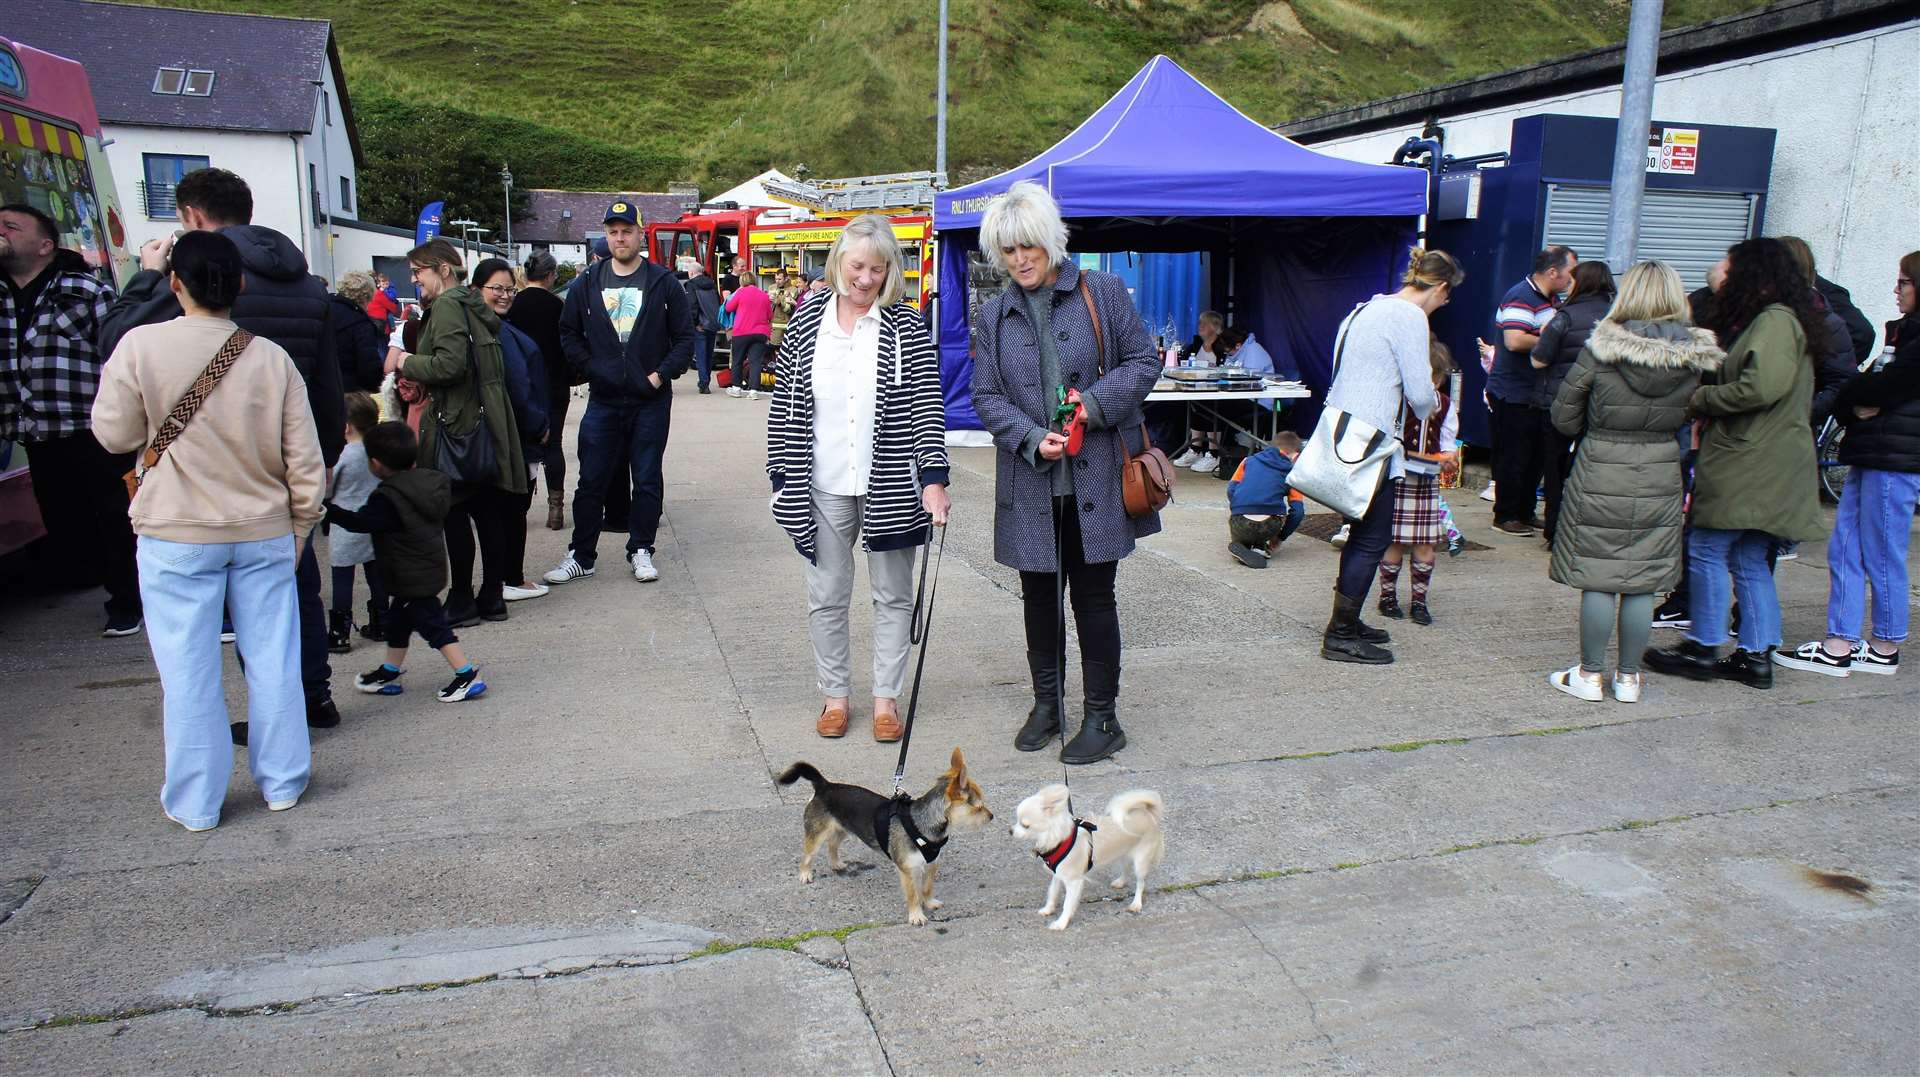 Visitors came along with their dogs to enjoy the event. Picture: DGS